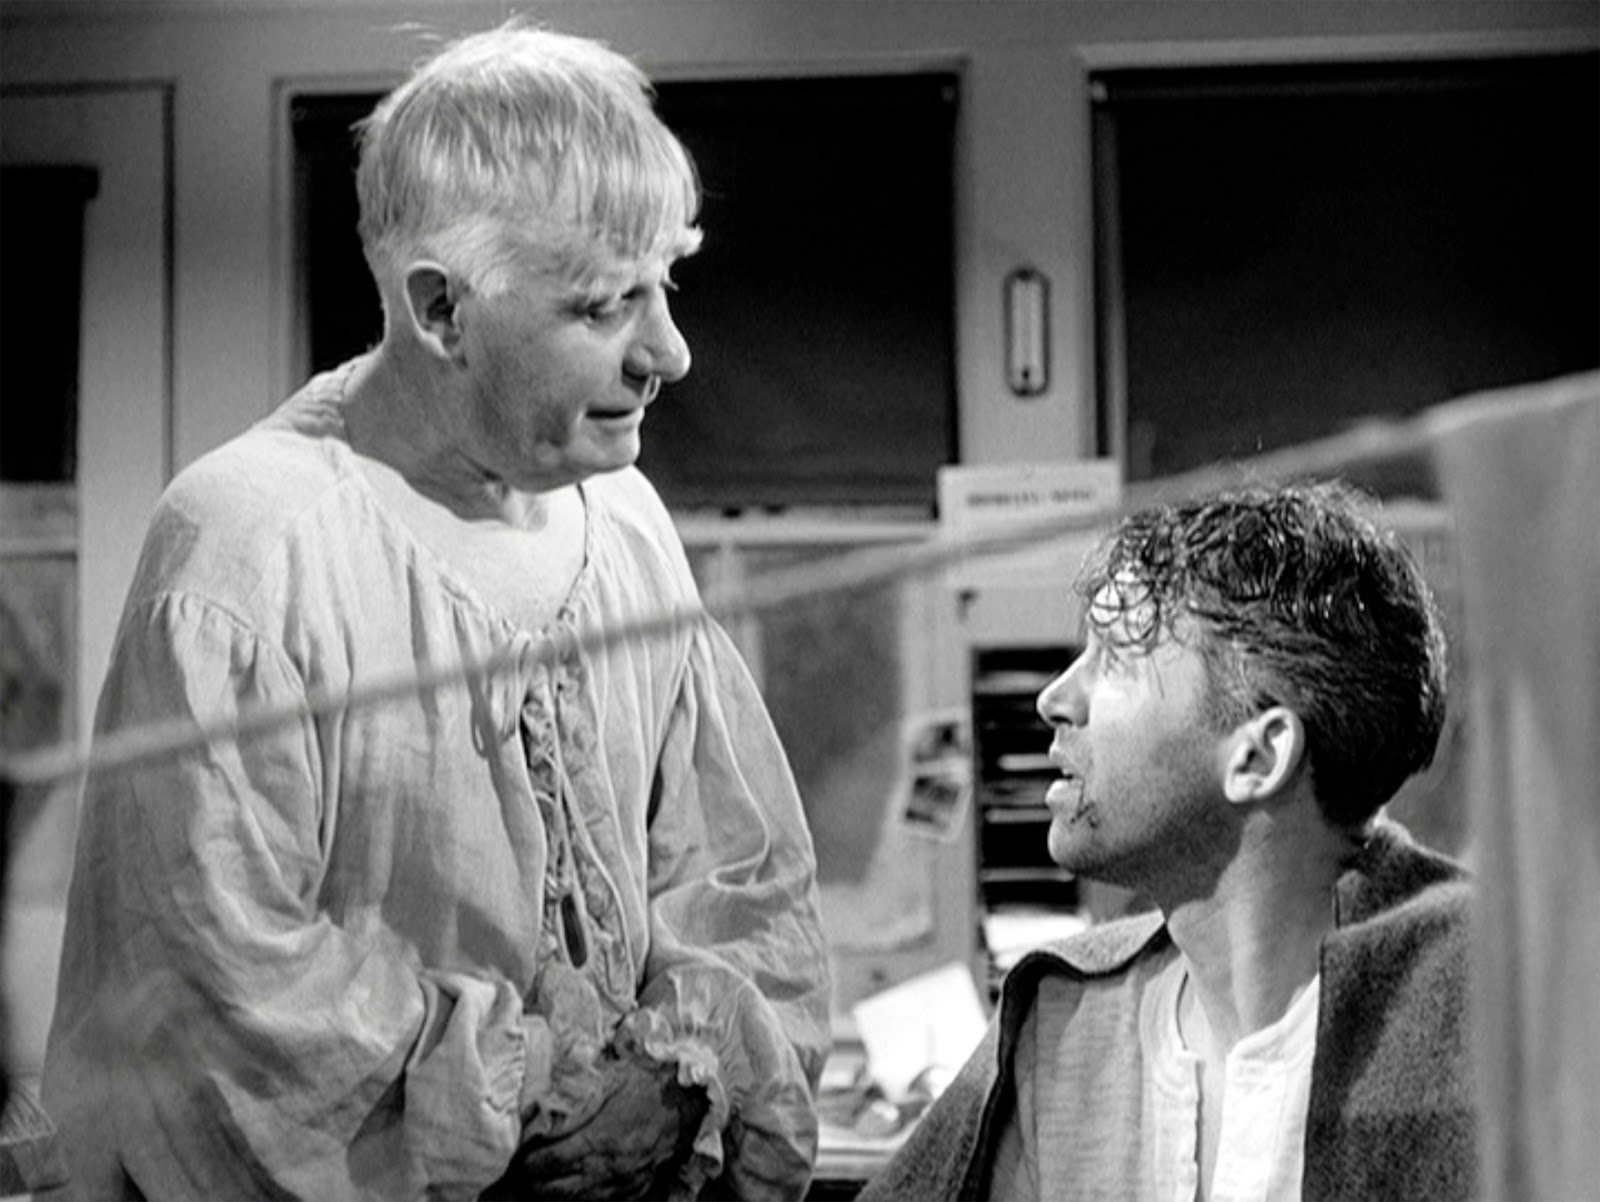 George Bailey (James Stewart) visited by the angel Clarence P. Oddbody (Henry Travers) in It;s a Wonderful Life (1946)